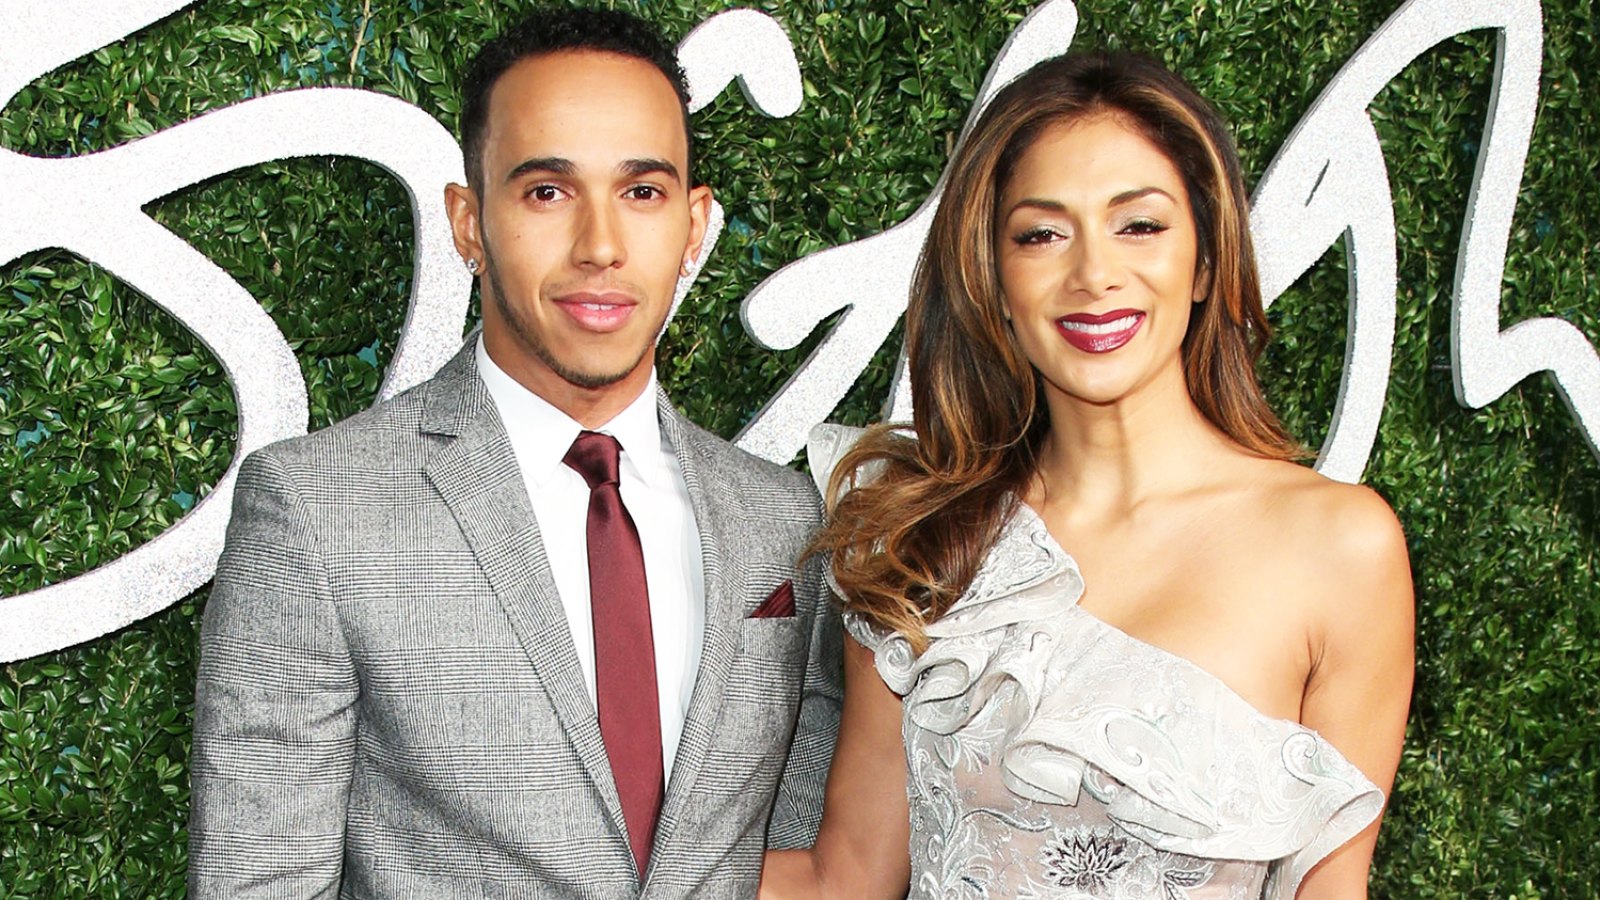 Lewis Hamilton and Nicole Scherzinger attend the British Fashion Awards at London Coliseum on December 1, 2014 in London, England.